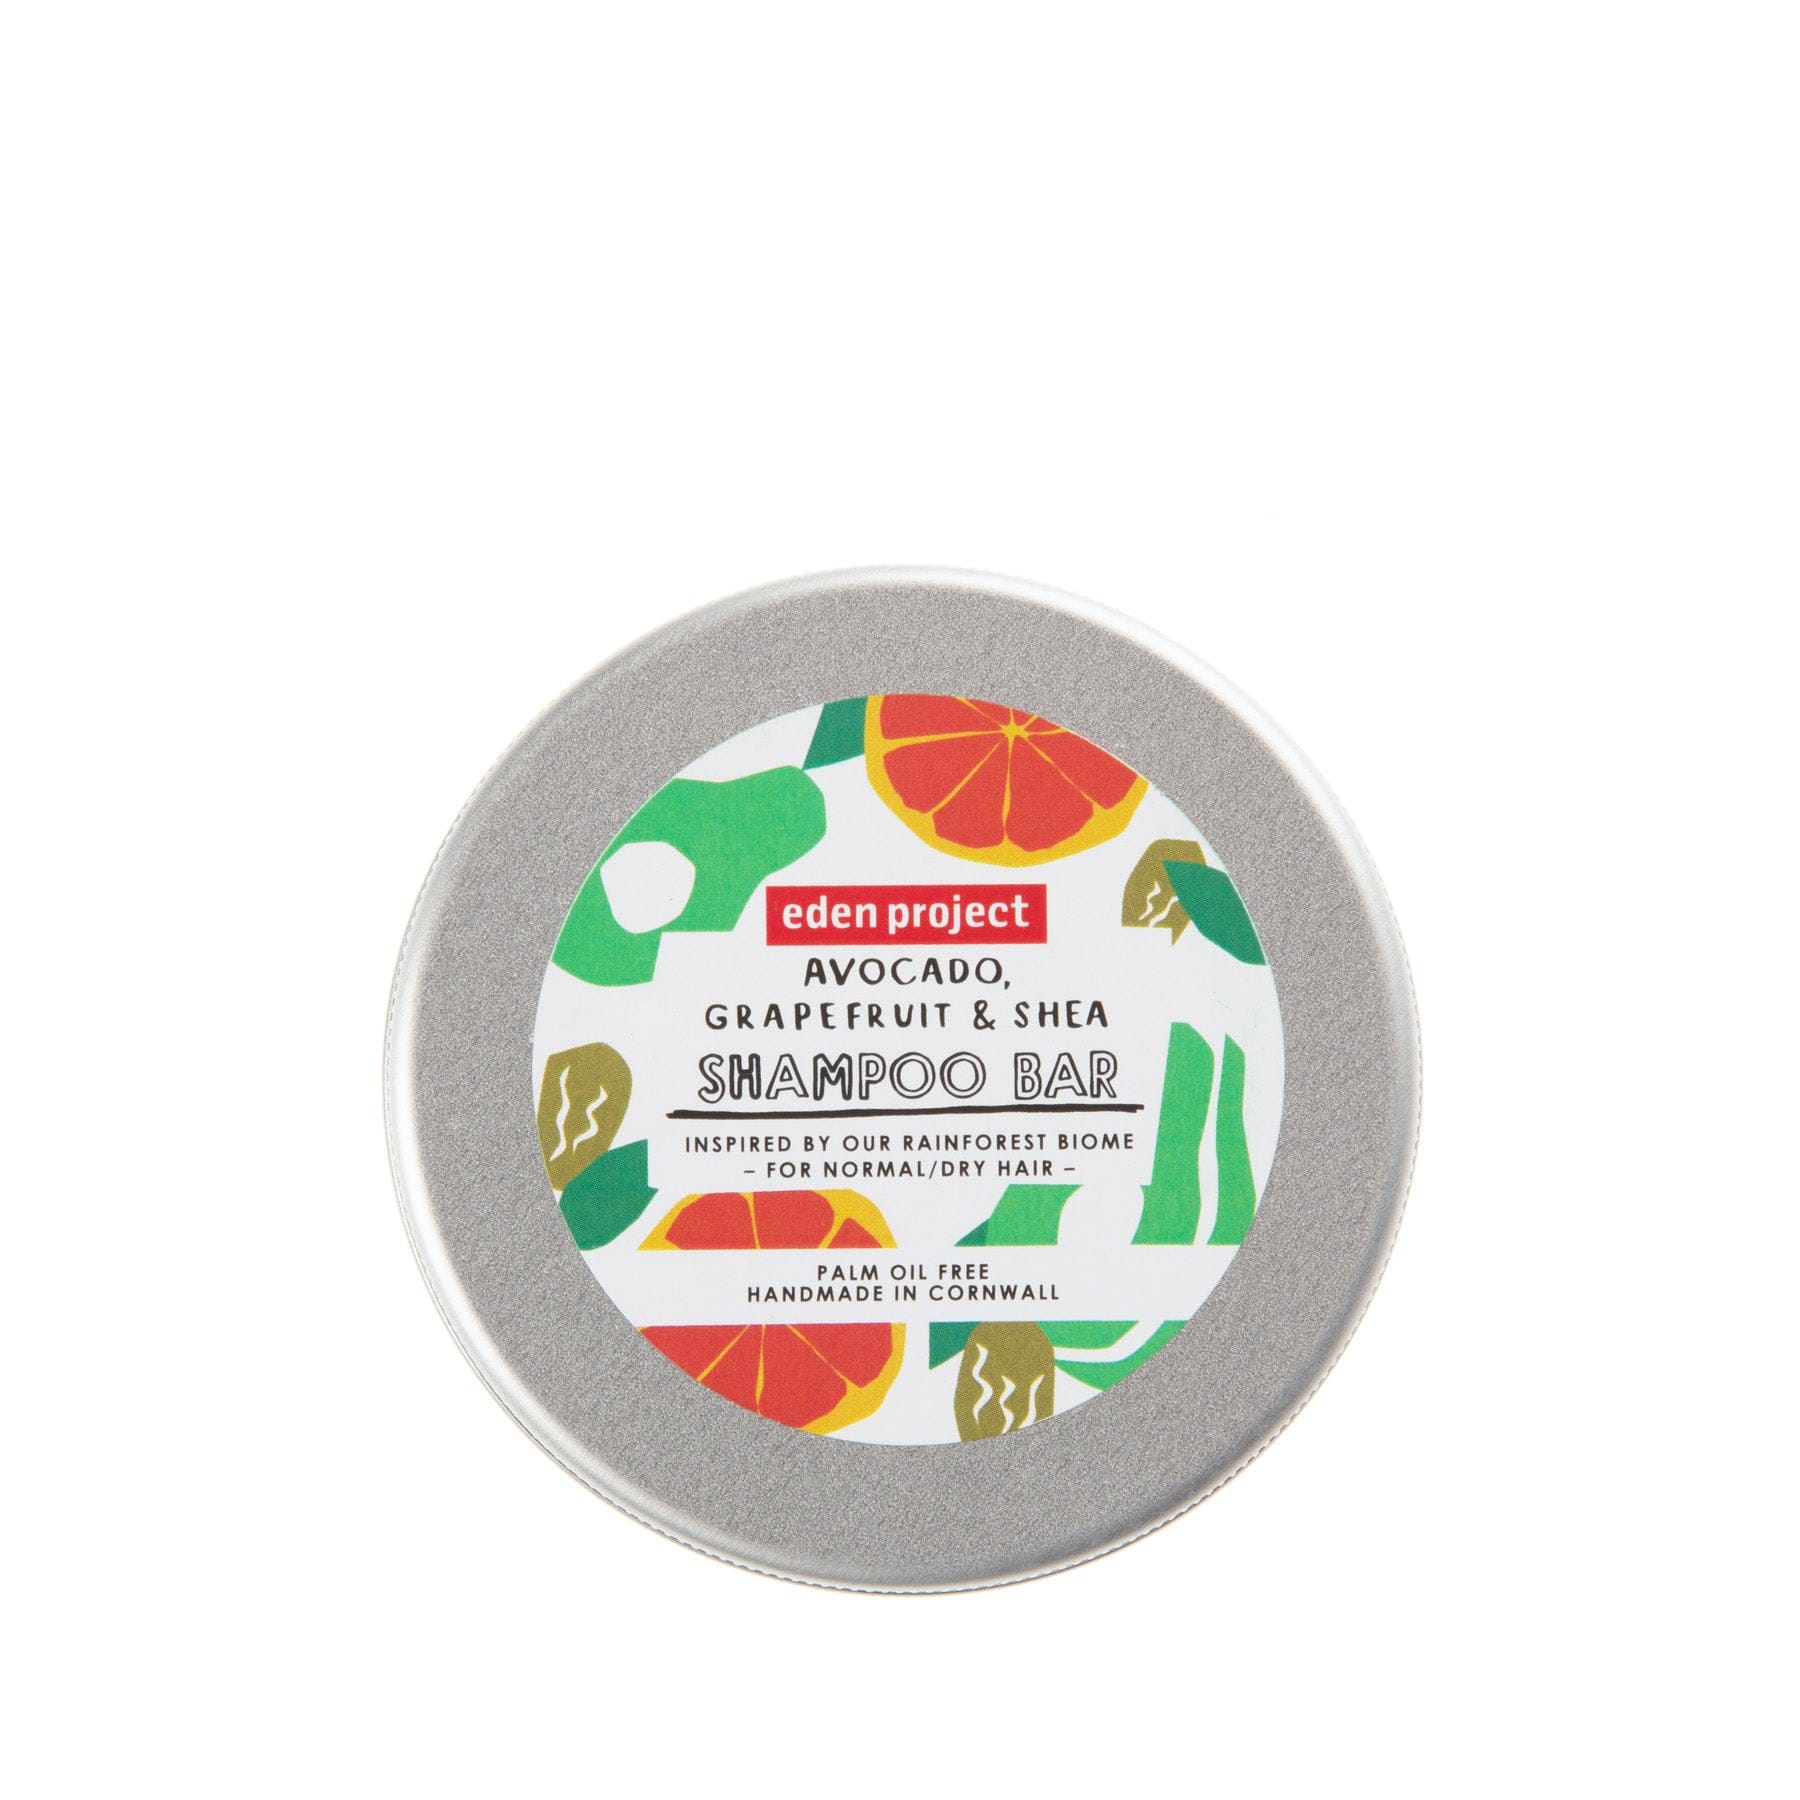 Eden Project Avocado, Grapefruit & Shea Shampoo Bar for Normal/Dry Hair, Palm Oil Free, Handmade in Cornwall, in circular metal tin on white background.